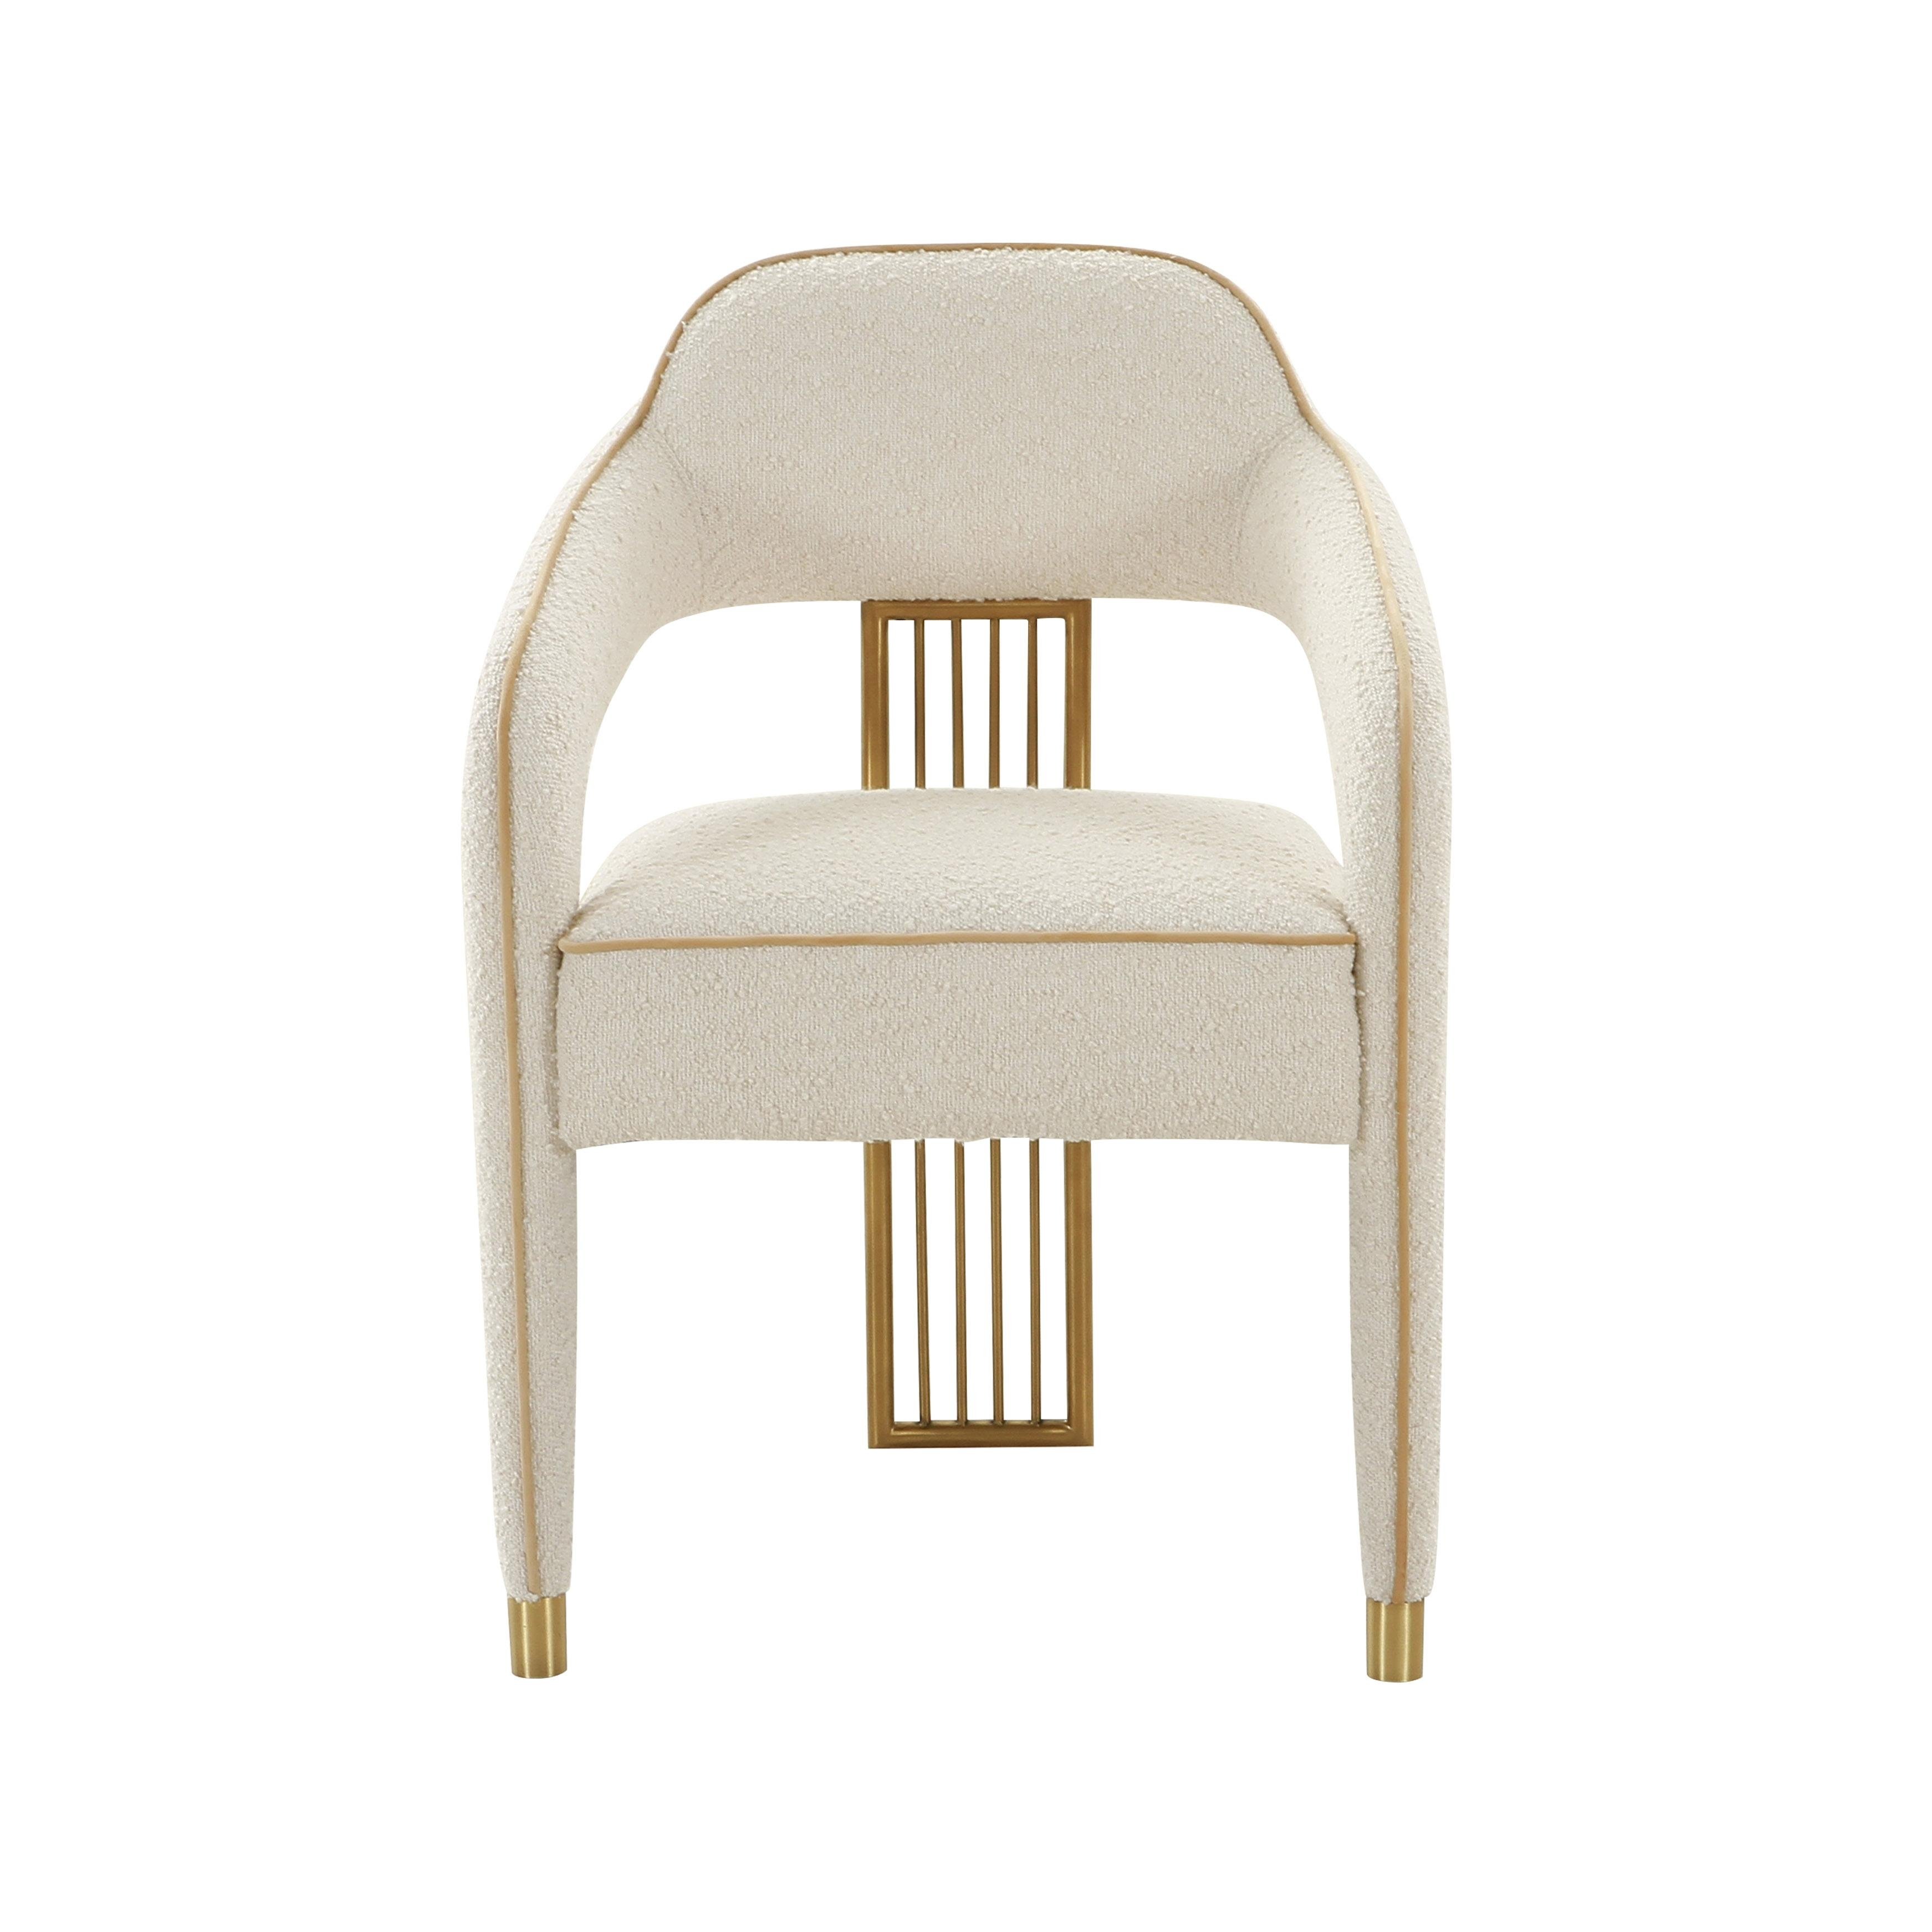 Corralis Cream Boucle Dining Chair - Image 1